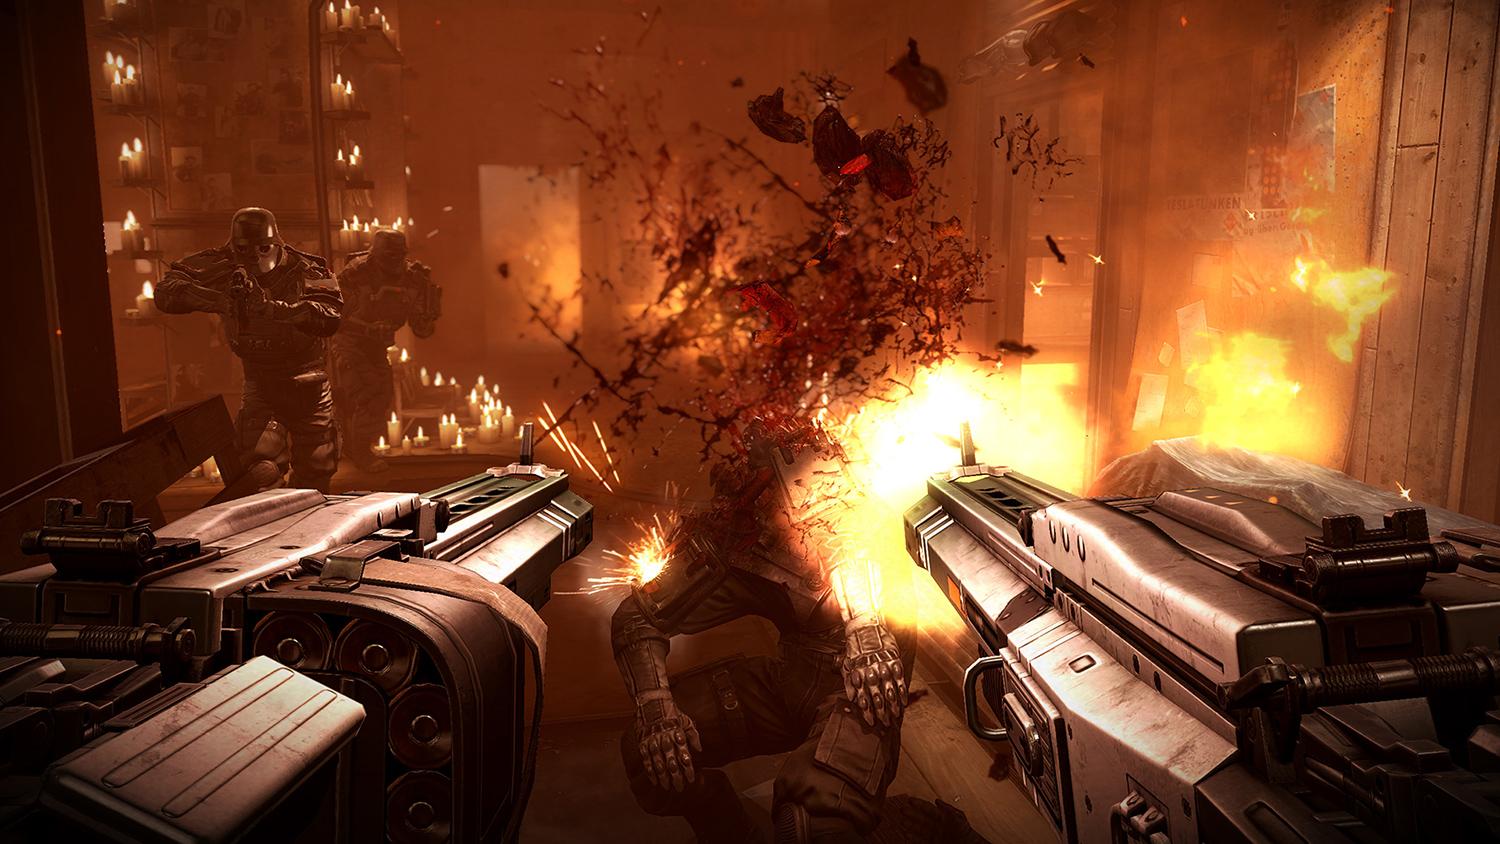 Wolfenstein: The New Order Enigma Code Pieces Locations Guide